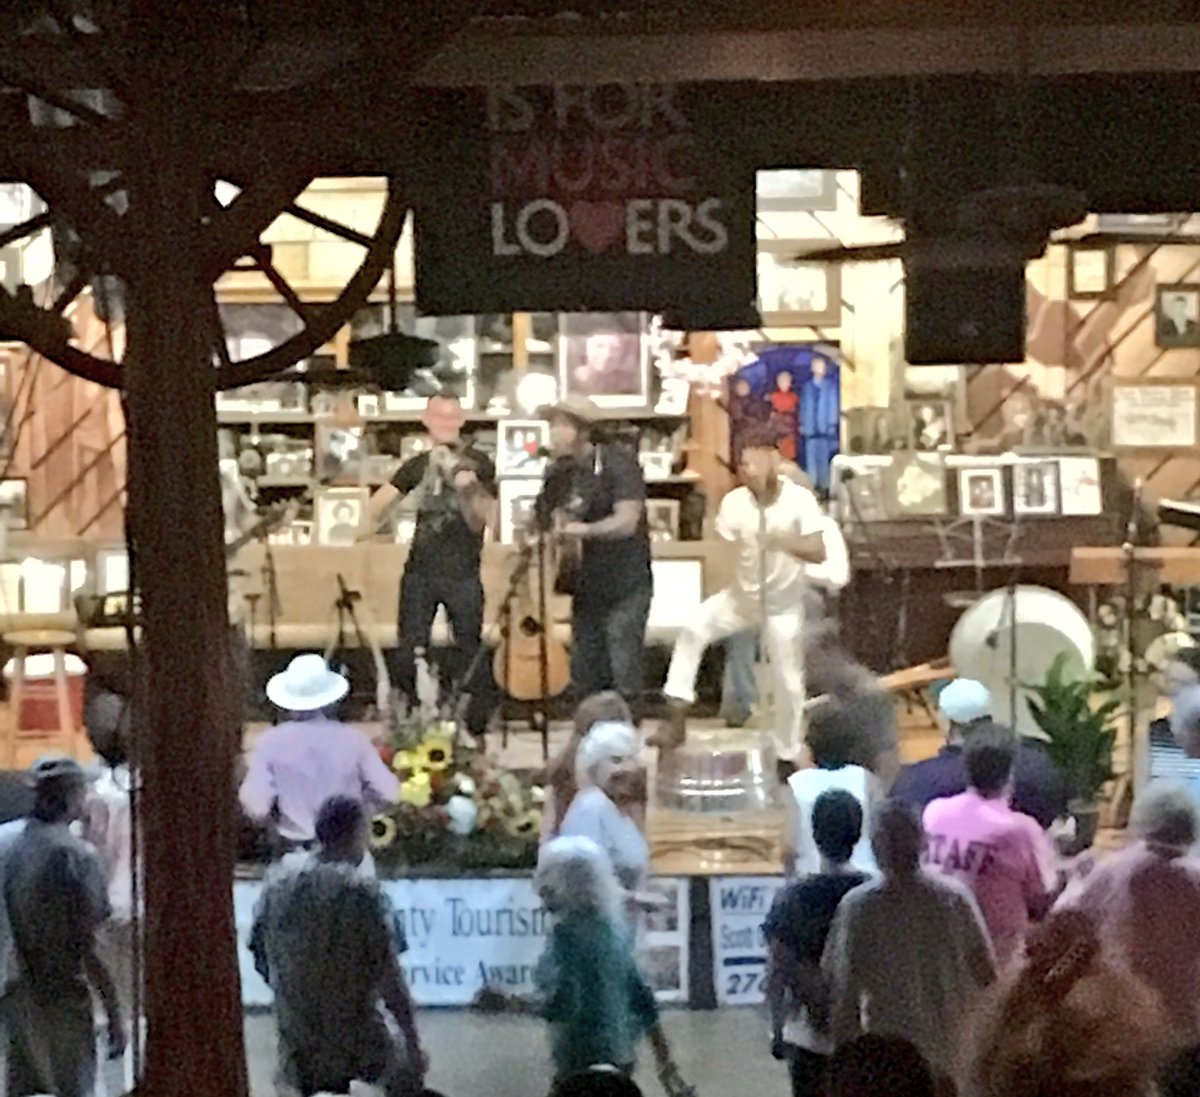 After witnessing the live birth of an alpaca we finished the evening with the Hogslop Stringband. #onlyinvirginia #carterfamilyfold